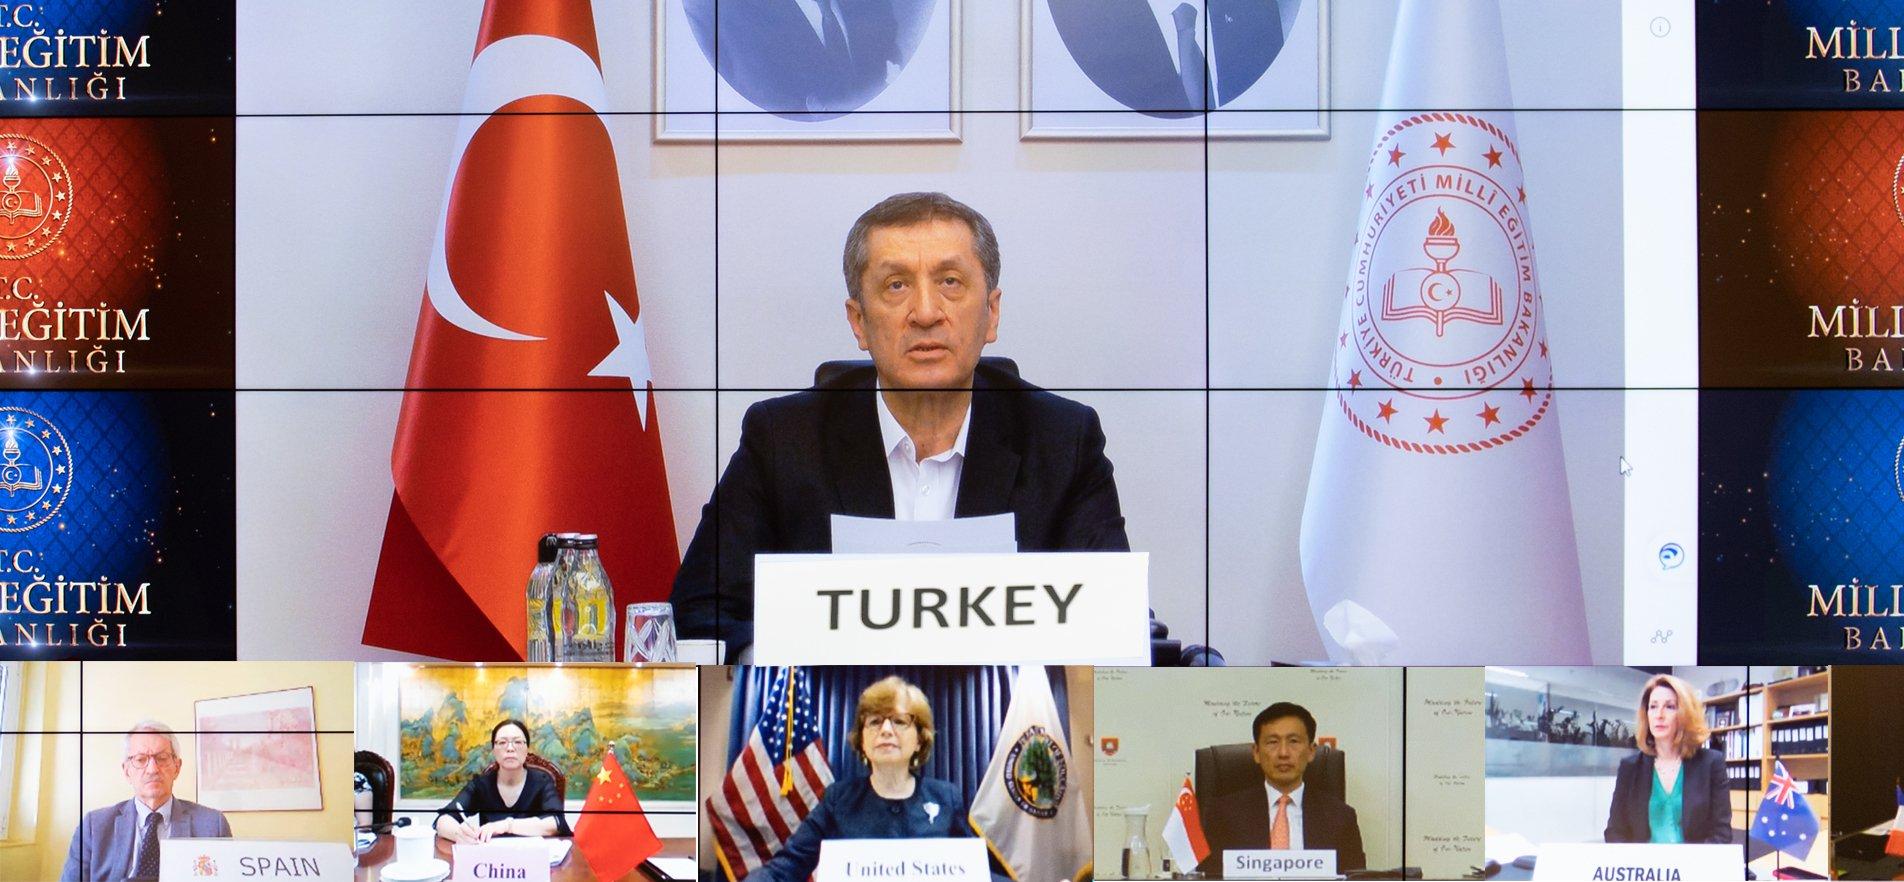 MINISTER SELÇUK TALKS ABOUT TURKEY'S COVID-19 EXPERIENCE TO G20 COUNTRIES